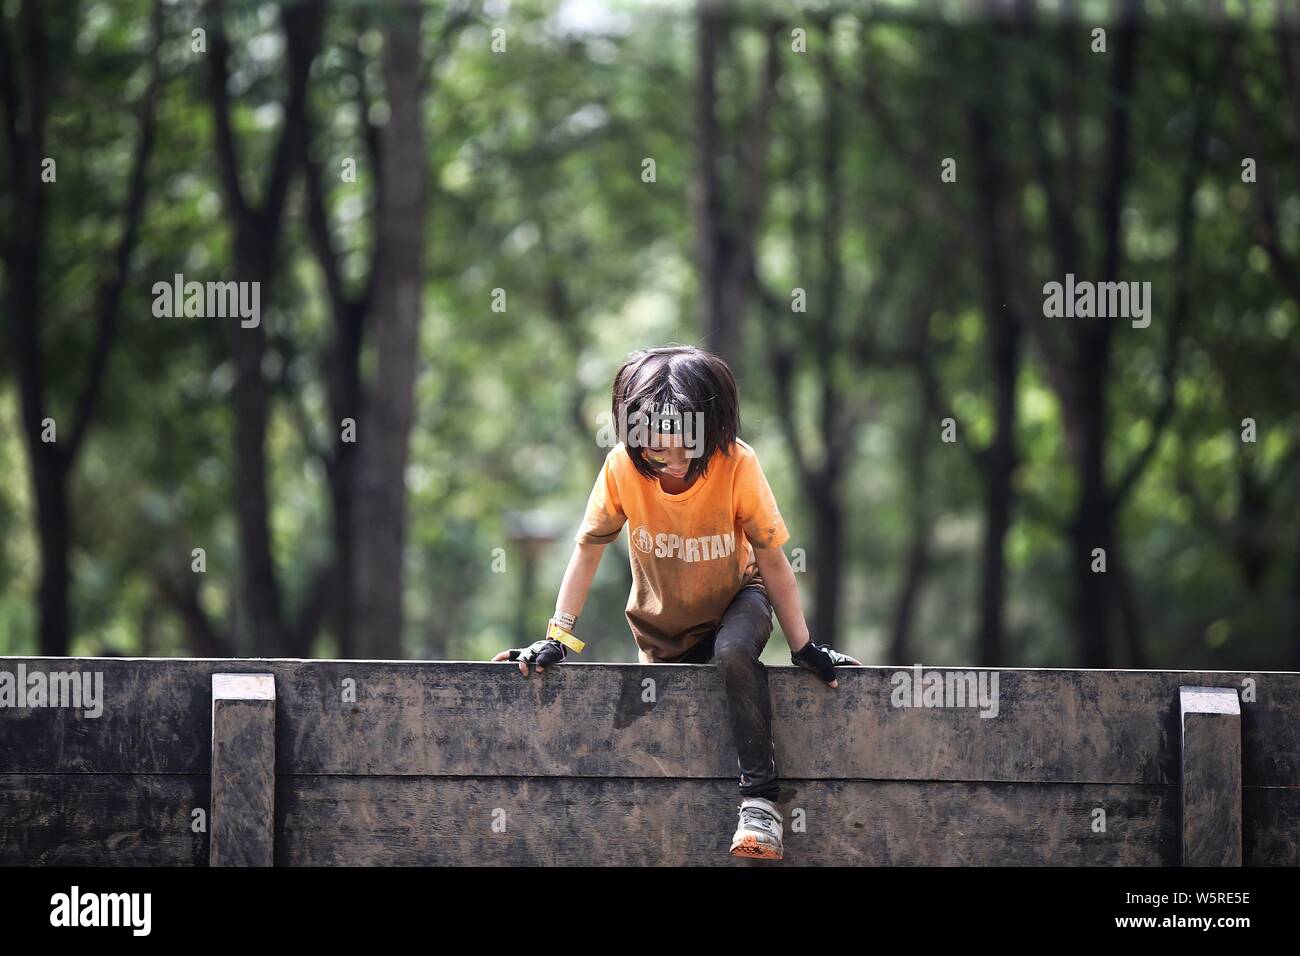 Kids compete in the Spartan kids' race to mark the International Children's Day in Beijing, China, 1 June 2019.   More than ten thousand children part Stock Photo